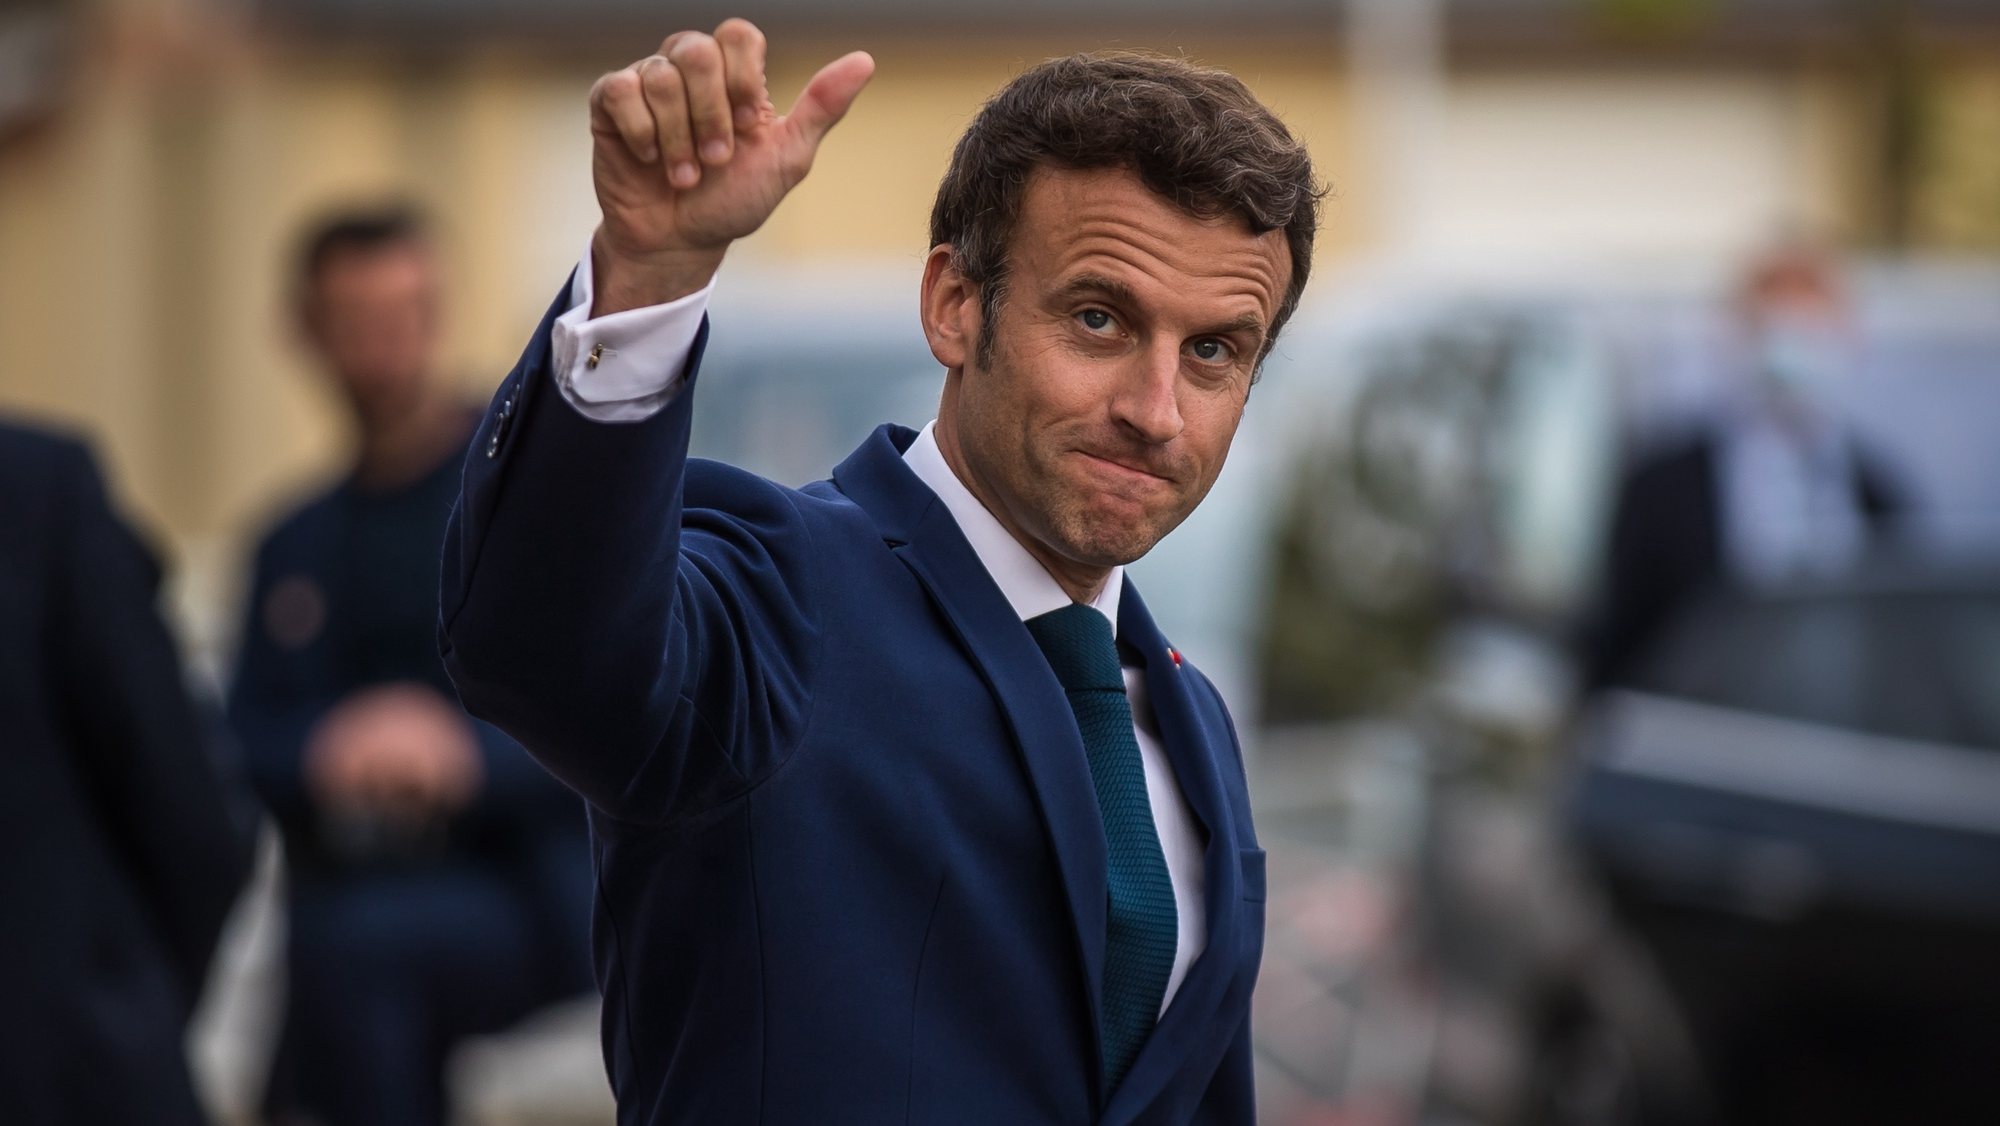 epa09914841 French President Emmanuel Macron waves as he leaves after his visit at the &#039;Percy&#039; Army Hospital in Clamart, near Paris, France, 28 April 2022. Macron met soldiers injured during external operations, and caregivers of the Percy Army Hospital.  EPA/CHRISTOPHE PETIT TESSON / POOL